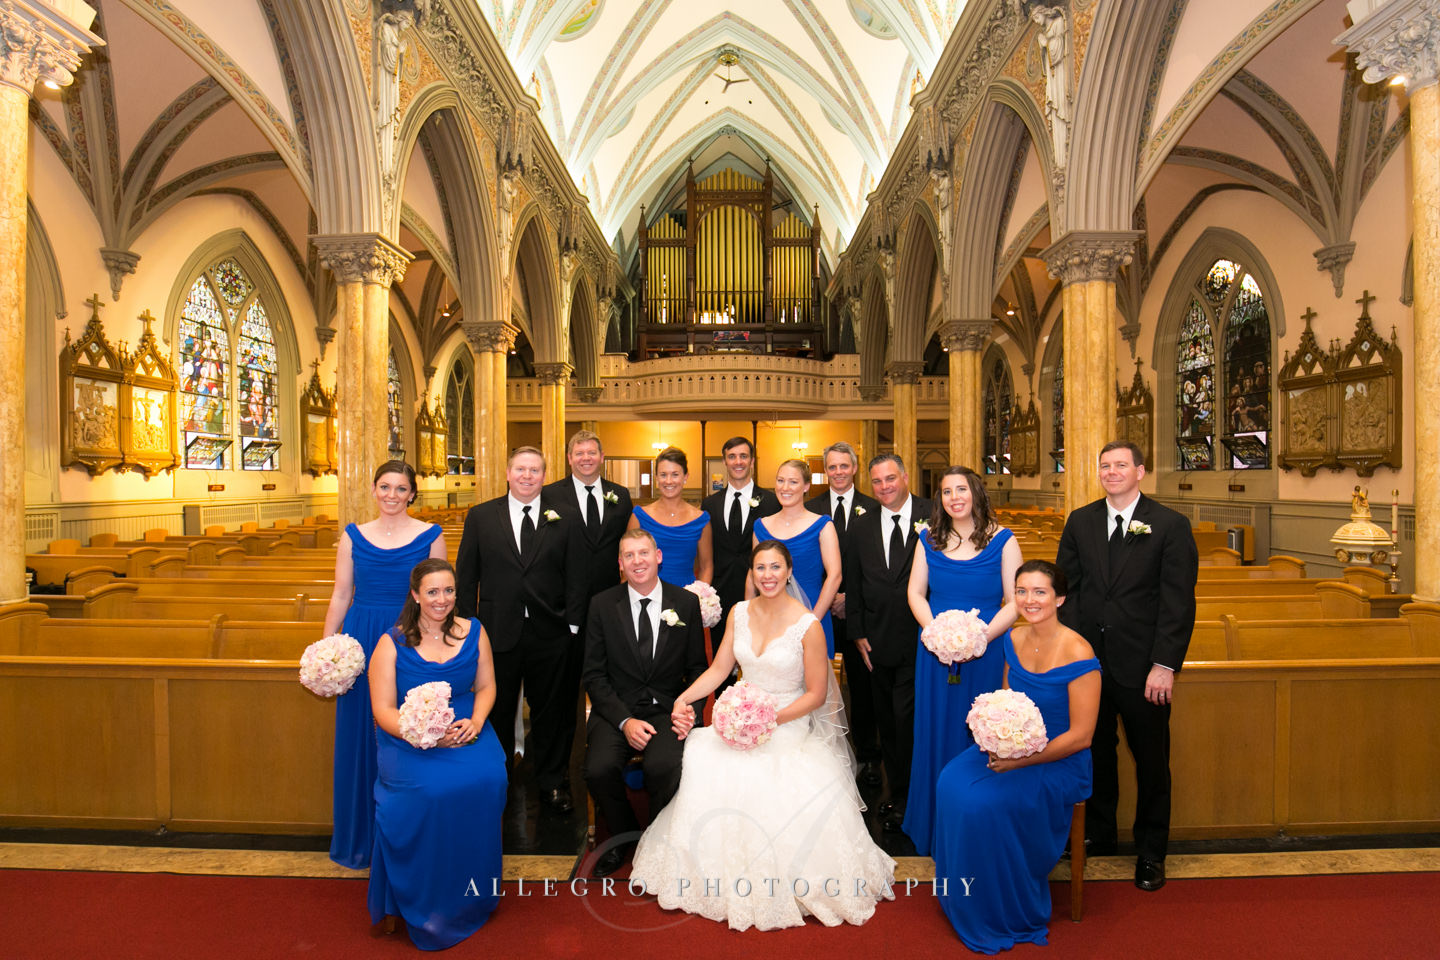 Our Lady of Victories Church formal portrait of wedding party- something different